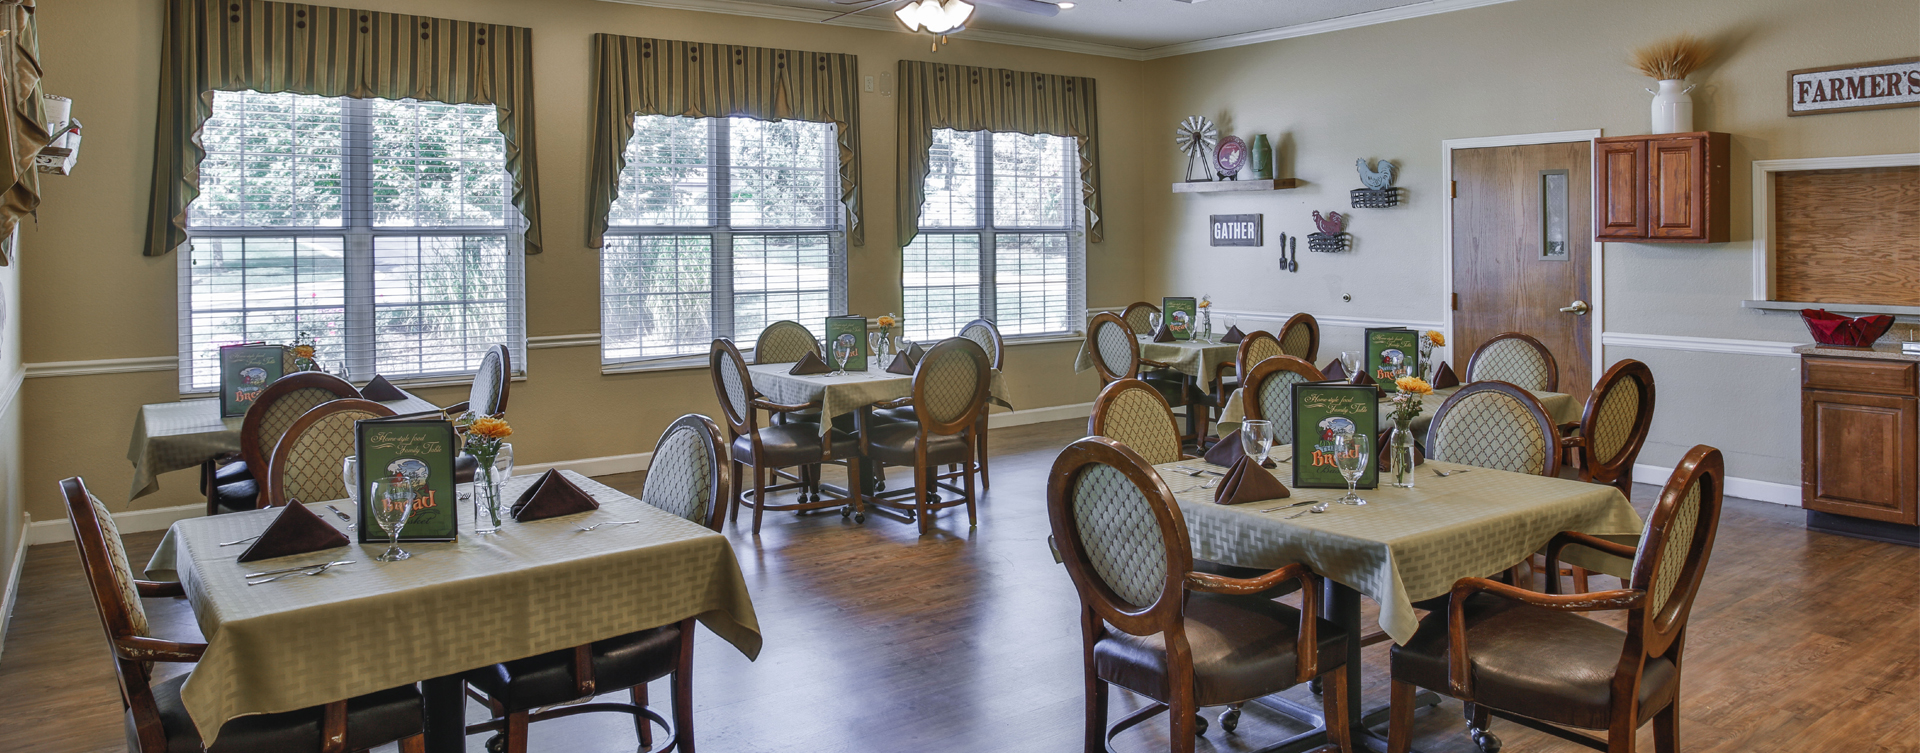 Residents with dementia receive additional assistance with meals in our Mary B’s dining room at Bickford of Peoria